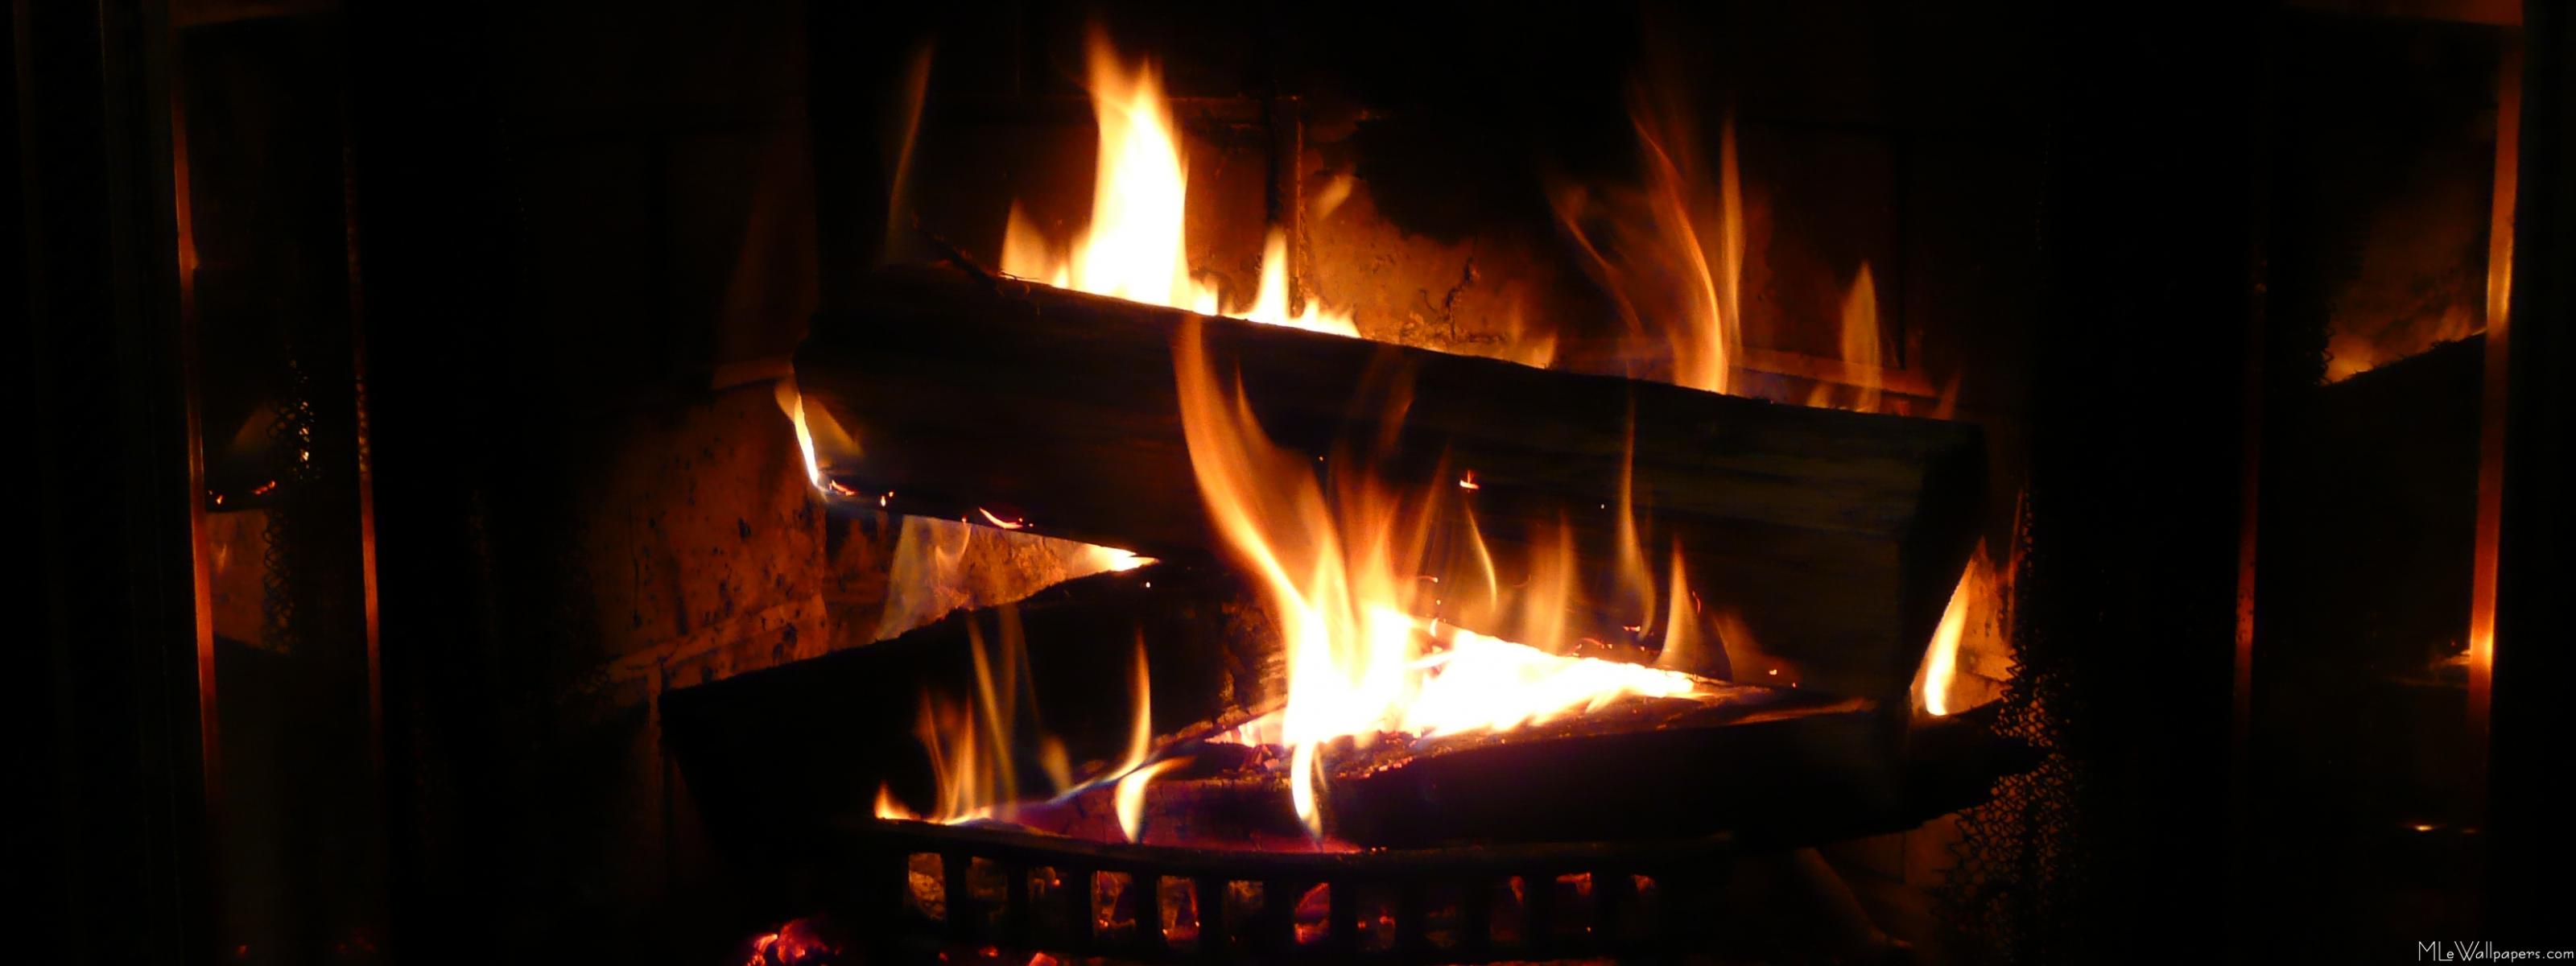 MLeWallpapers.com - Fireplace